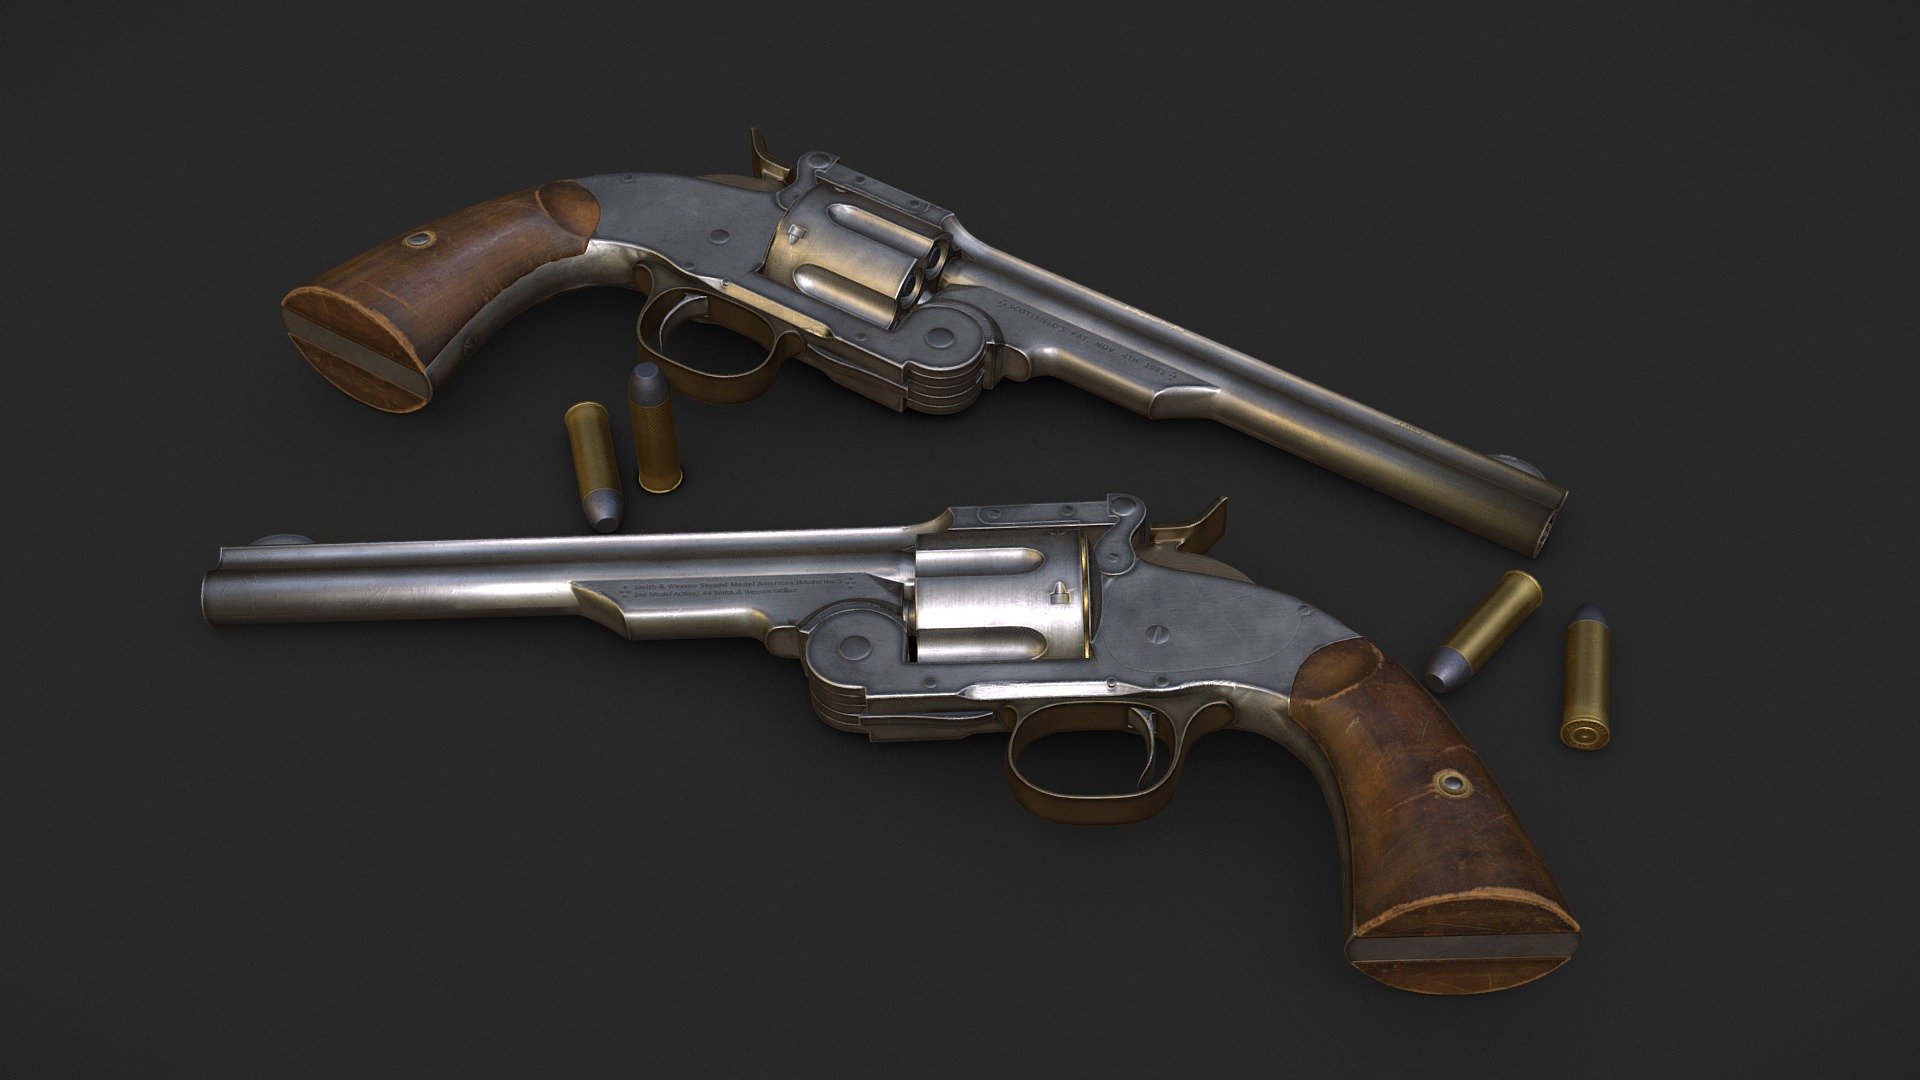 Low poly Schofield Revolver 3D model


Features:



The model is low poly and optimized for use in game, VR, archviz and visual production.

The model has clean topology and named appropriately and unwrapped with no overlaps.

12263 triangles; 6448 vertices;

Modeled in Autodesk Maya and textured in Adobe Substance Painter.


Textures:
Model has 1 PBR texture set. Textures are in .jpg at 4096x4096 and includes: Base color, Roughness, and Metalic.

Link to artstation: https://www.artstation.com/artwork/8wa6En - Schofield Revolver - 3D model by Otabek Muminov (@otabekm) 3d model